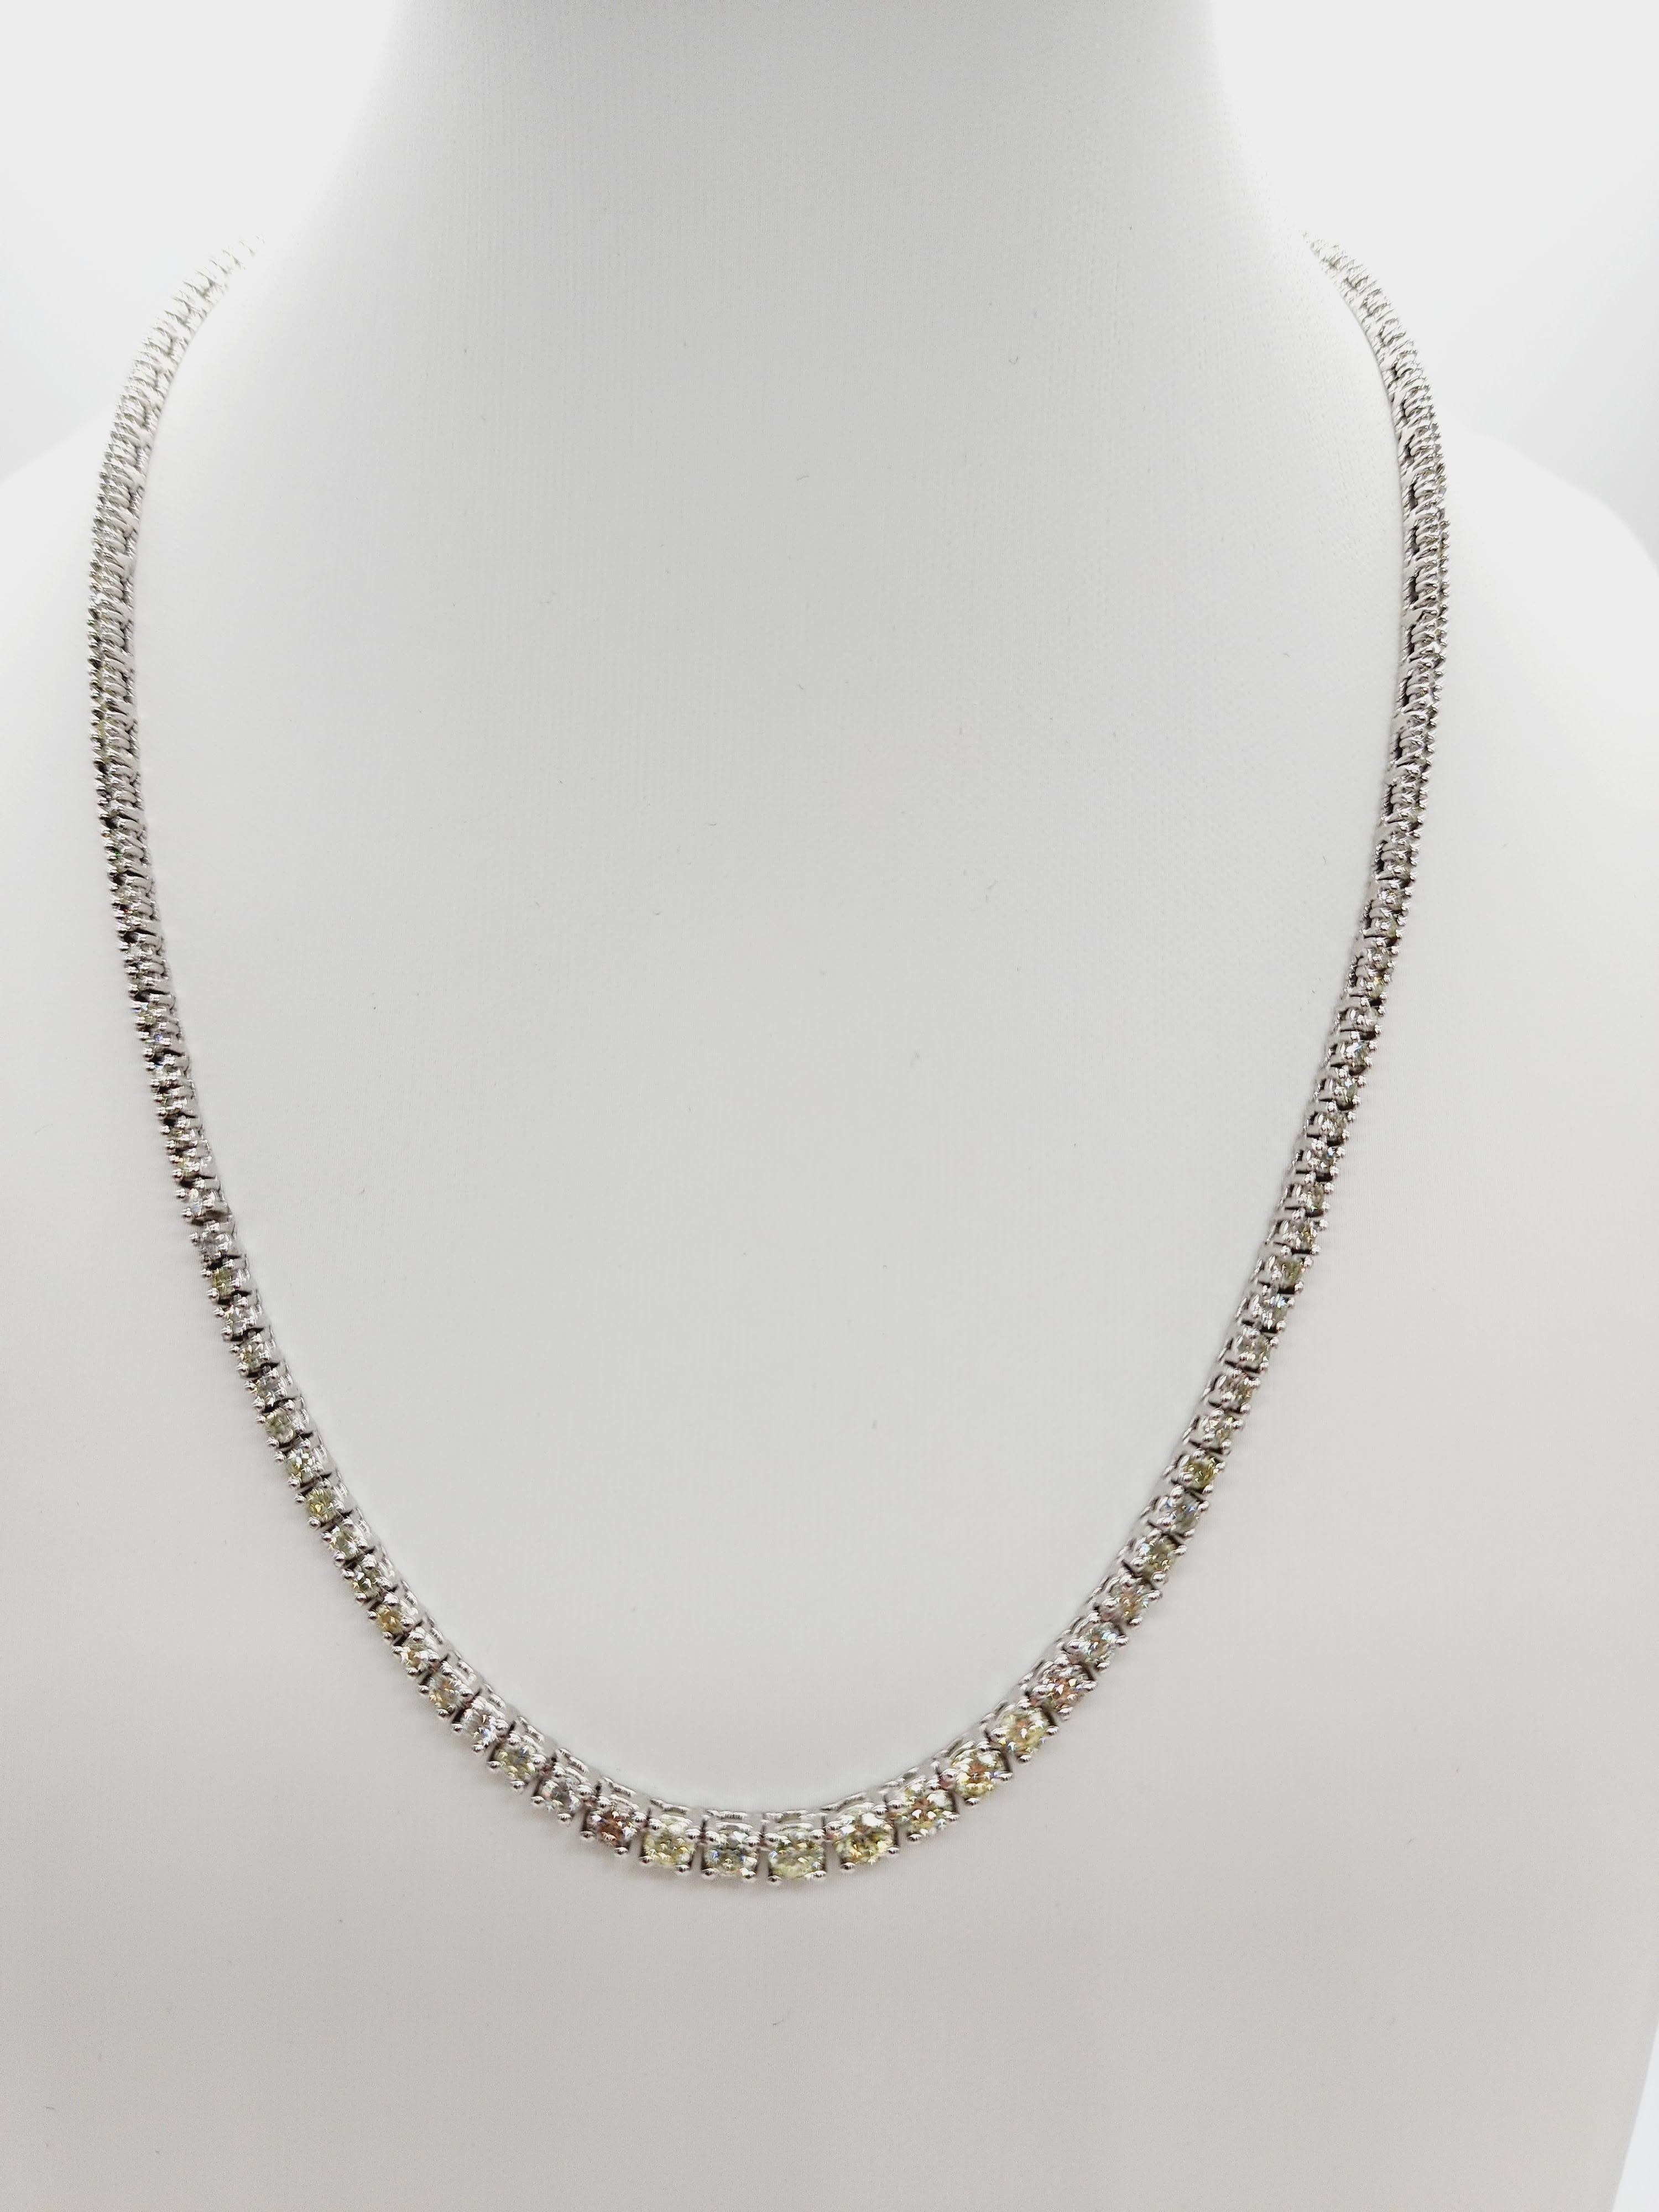 Brilliant and beautiful Riviera necklace, round-brilliant cut natural diamonds. 
14k white gold classic four-prong style for maximum light brilliance.
16 inch length. Average color J Color, I Clarity. 